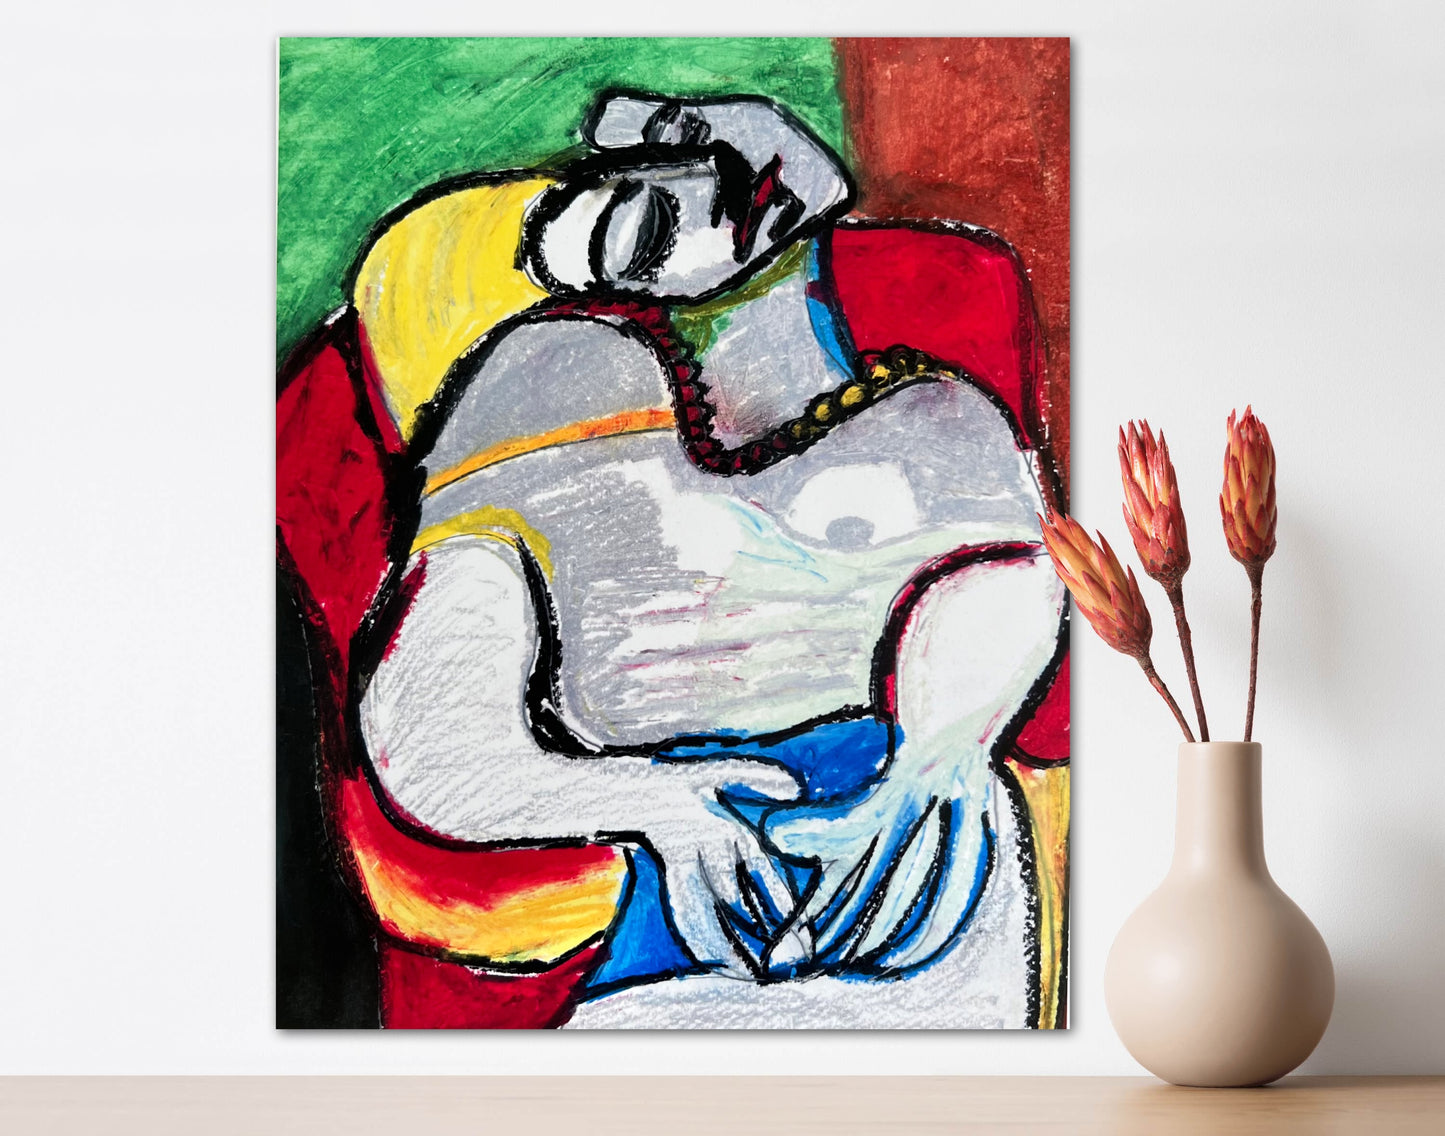 Dream Picasso I - Print, Poster or Stretched Canvas Print in more sizes